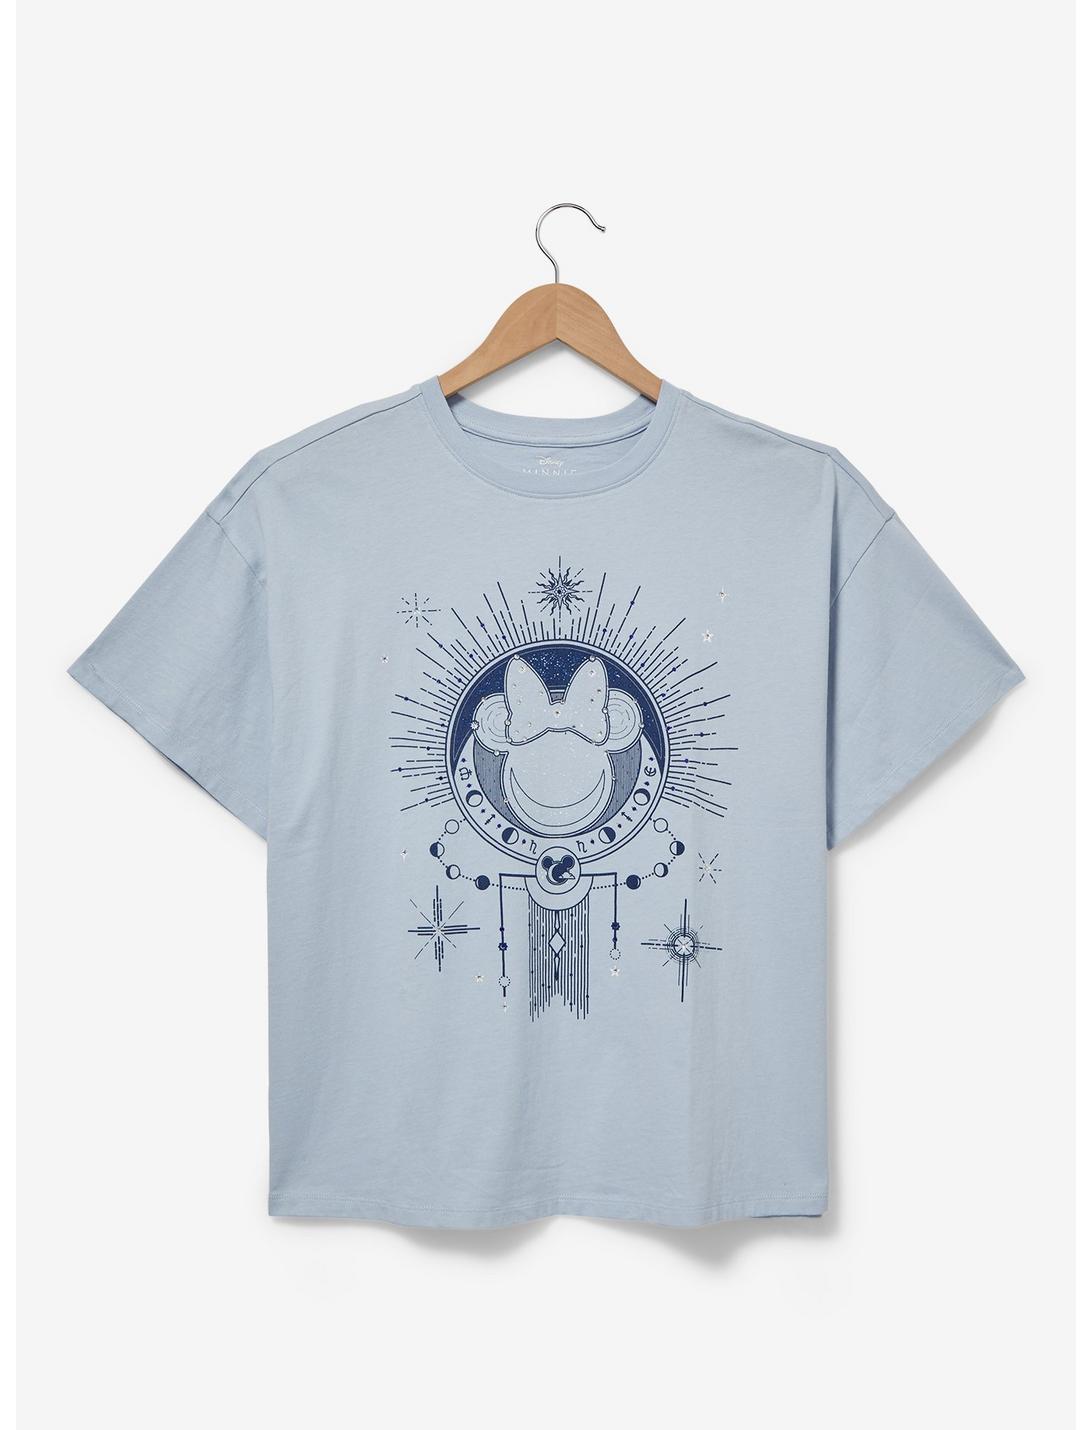 Disney Minnie Mouse Celestial Patterned Rhinestone Women's T-Shirt - BoxLunch Exclusive, LIGHT BLUE, hi-res